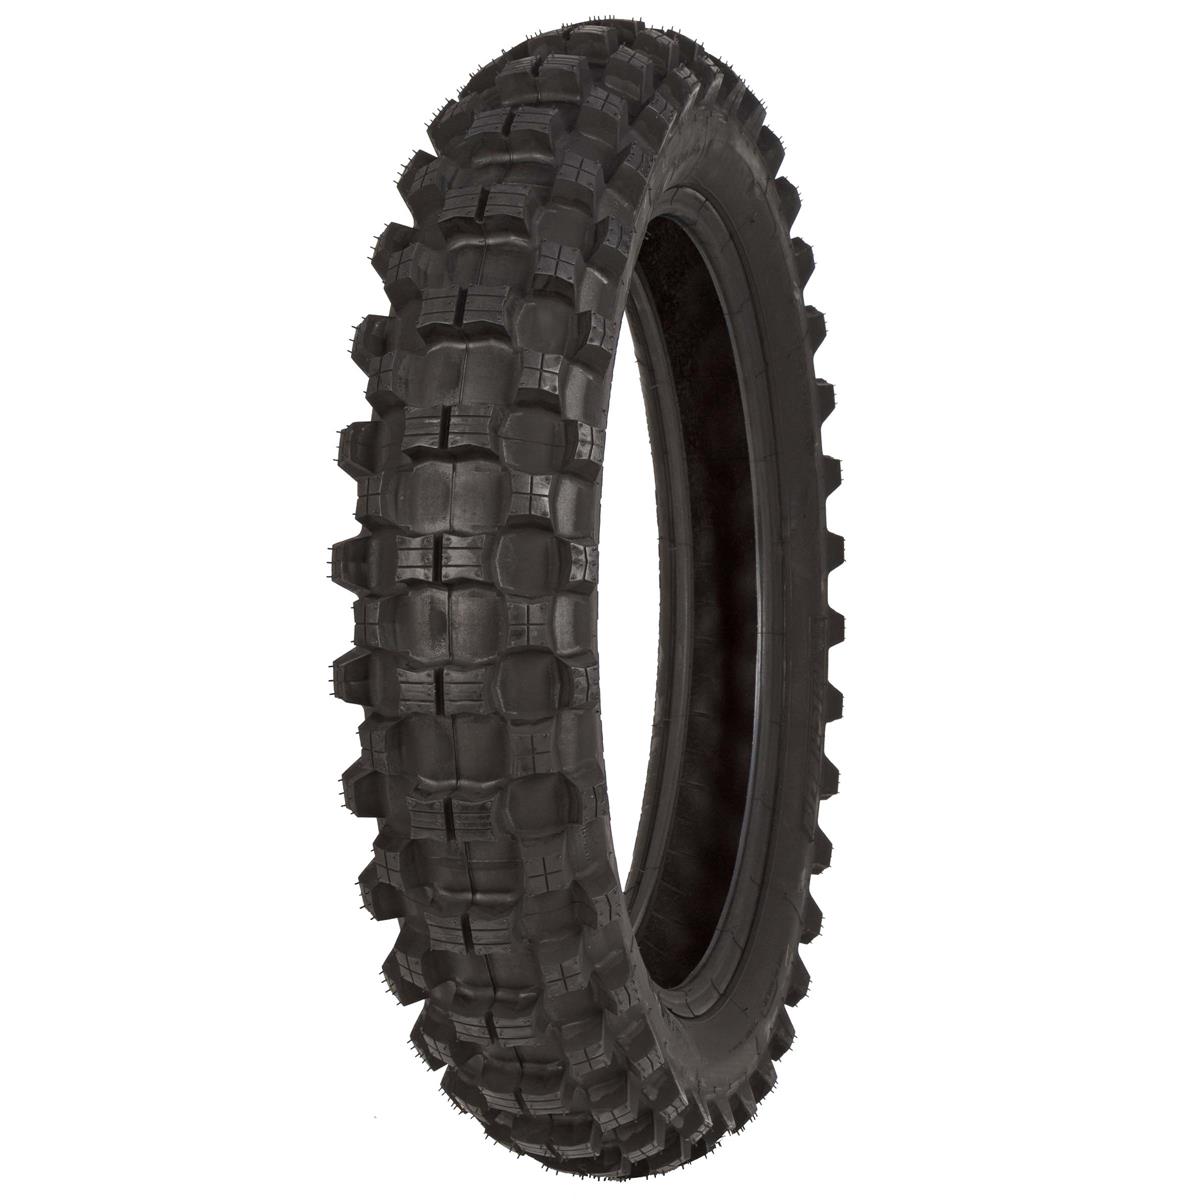 Michelin Rear Tire Cross Competition S12 XC Motocross 140/80-18